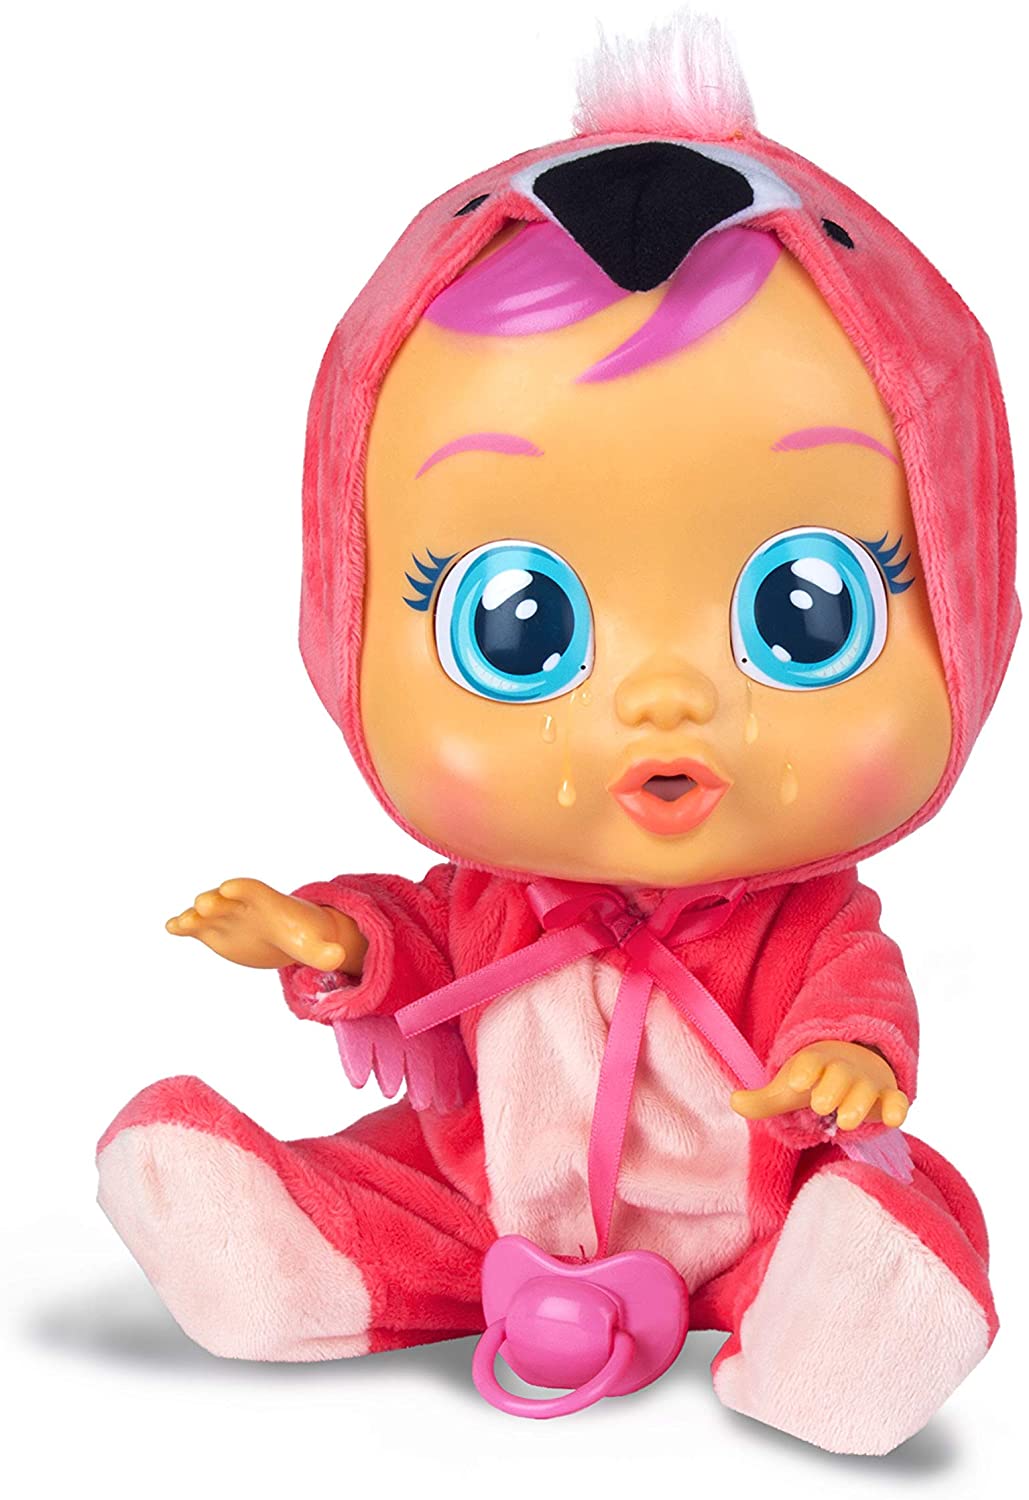 IMC Toys - Cry Babies - 97056 - Bebe' Piagnucolosi -  FANCY